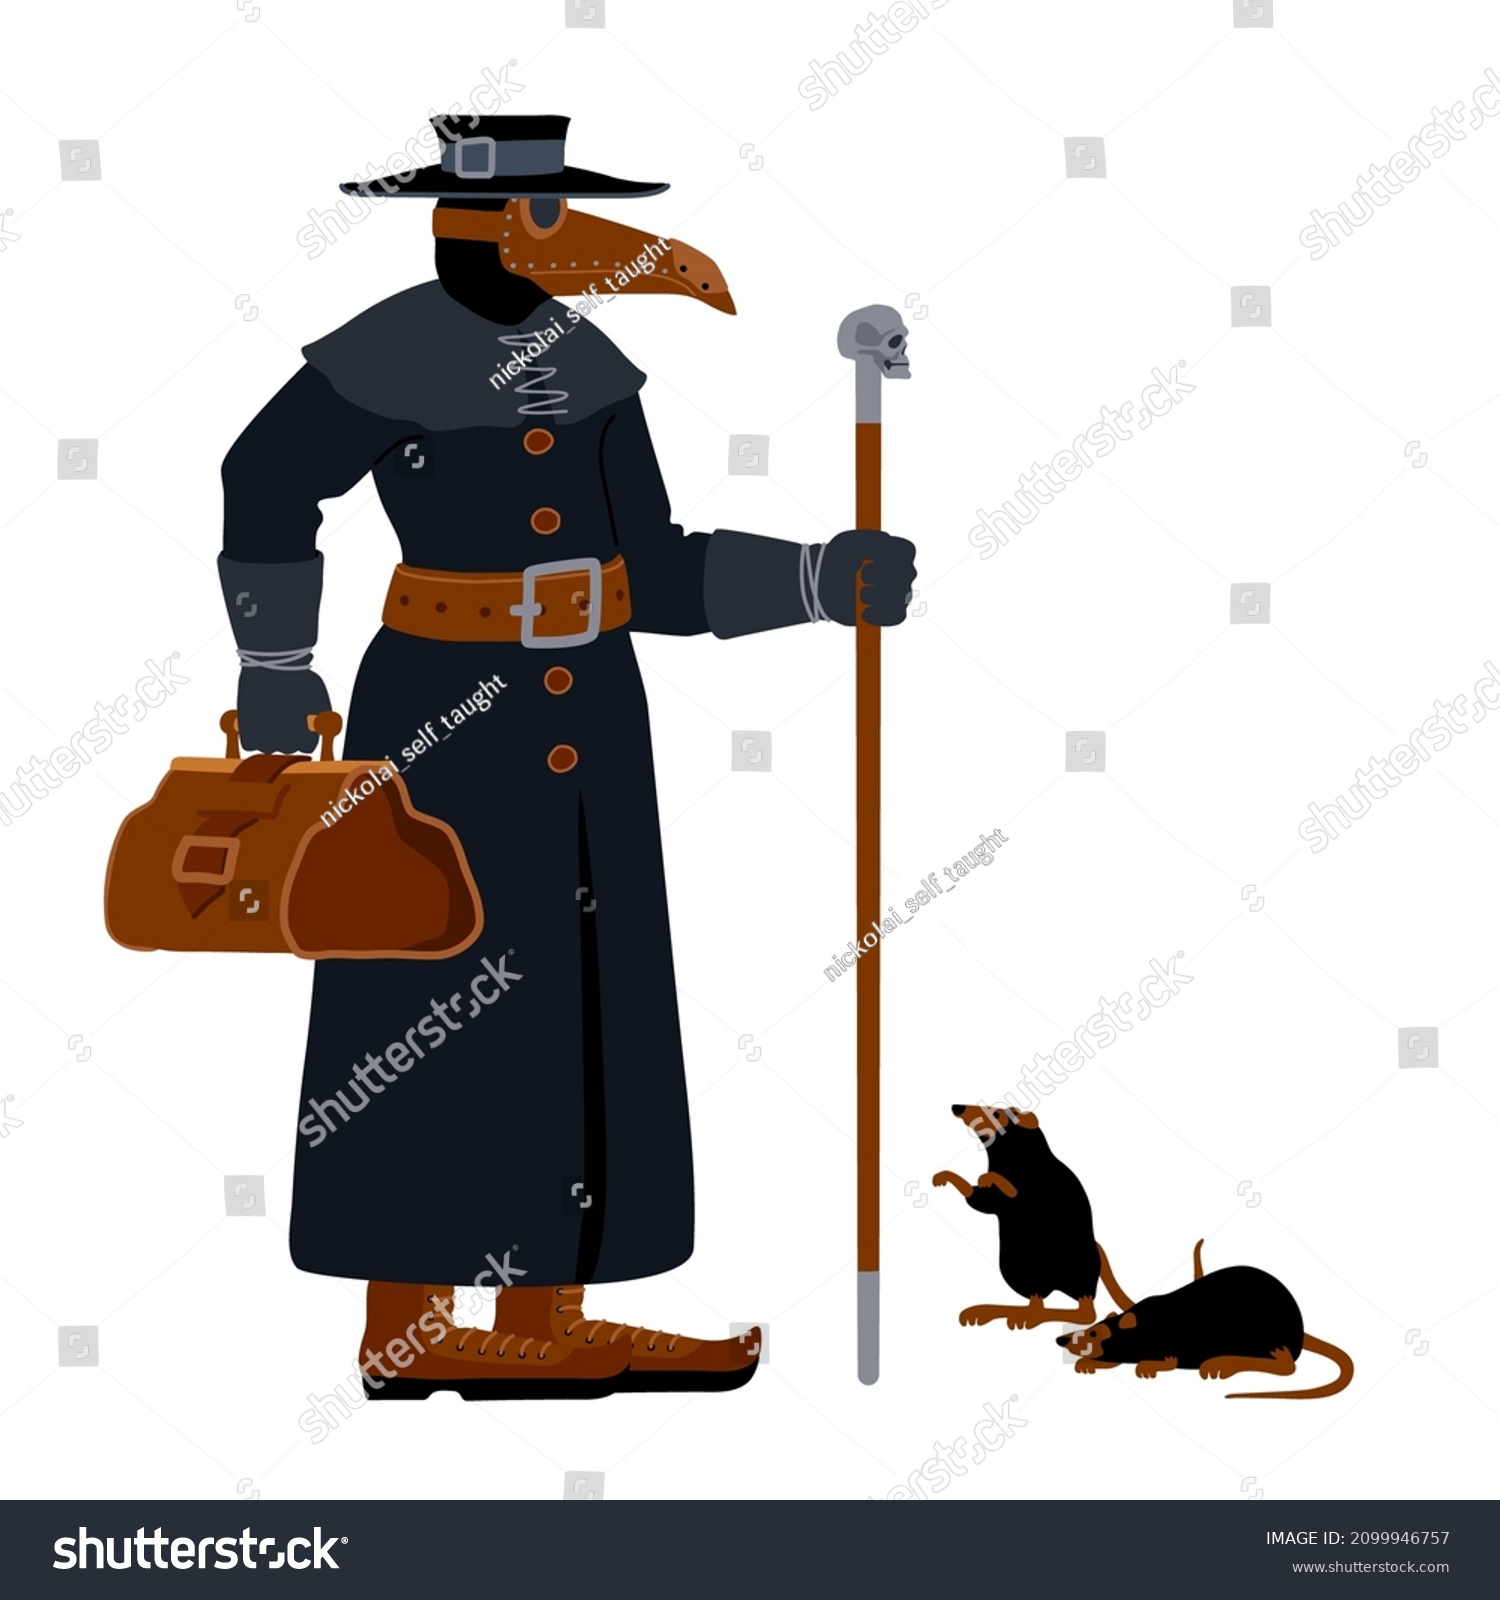 SVG of A plague doctor in a protective suit with a leather travel bag, walking stick and rats. A medieval character. Color vector illustration isolated on a white background in a cartoon and flat design. svg